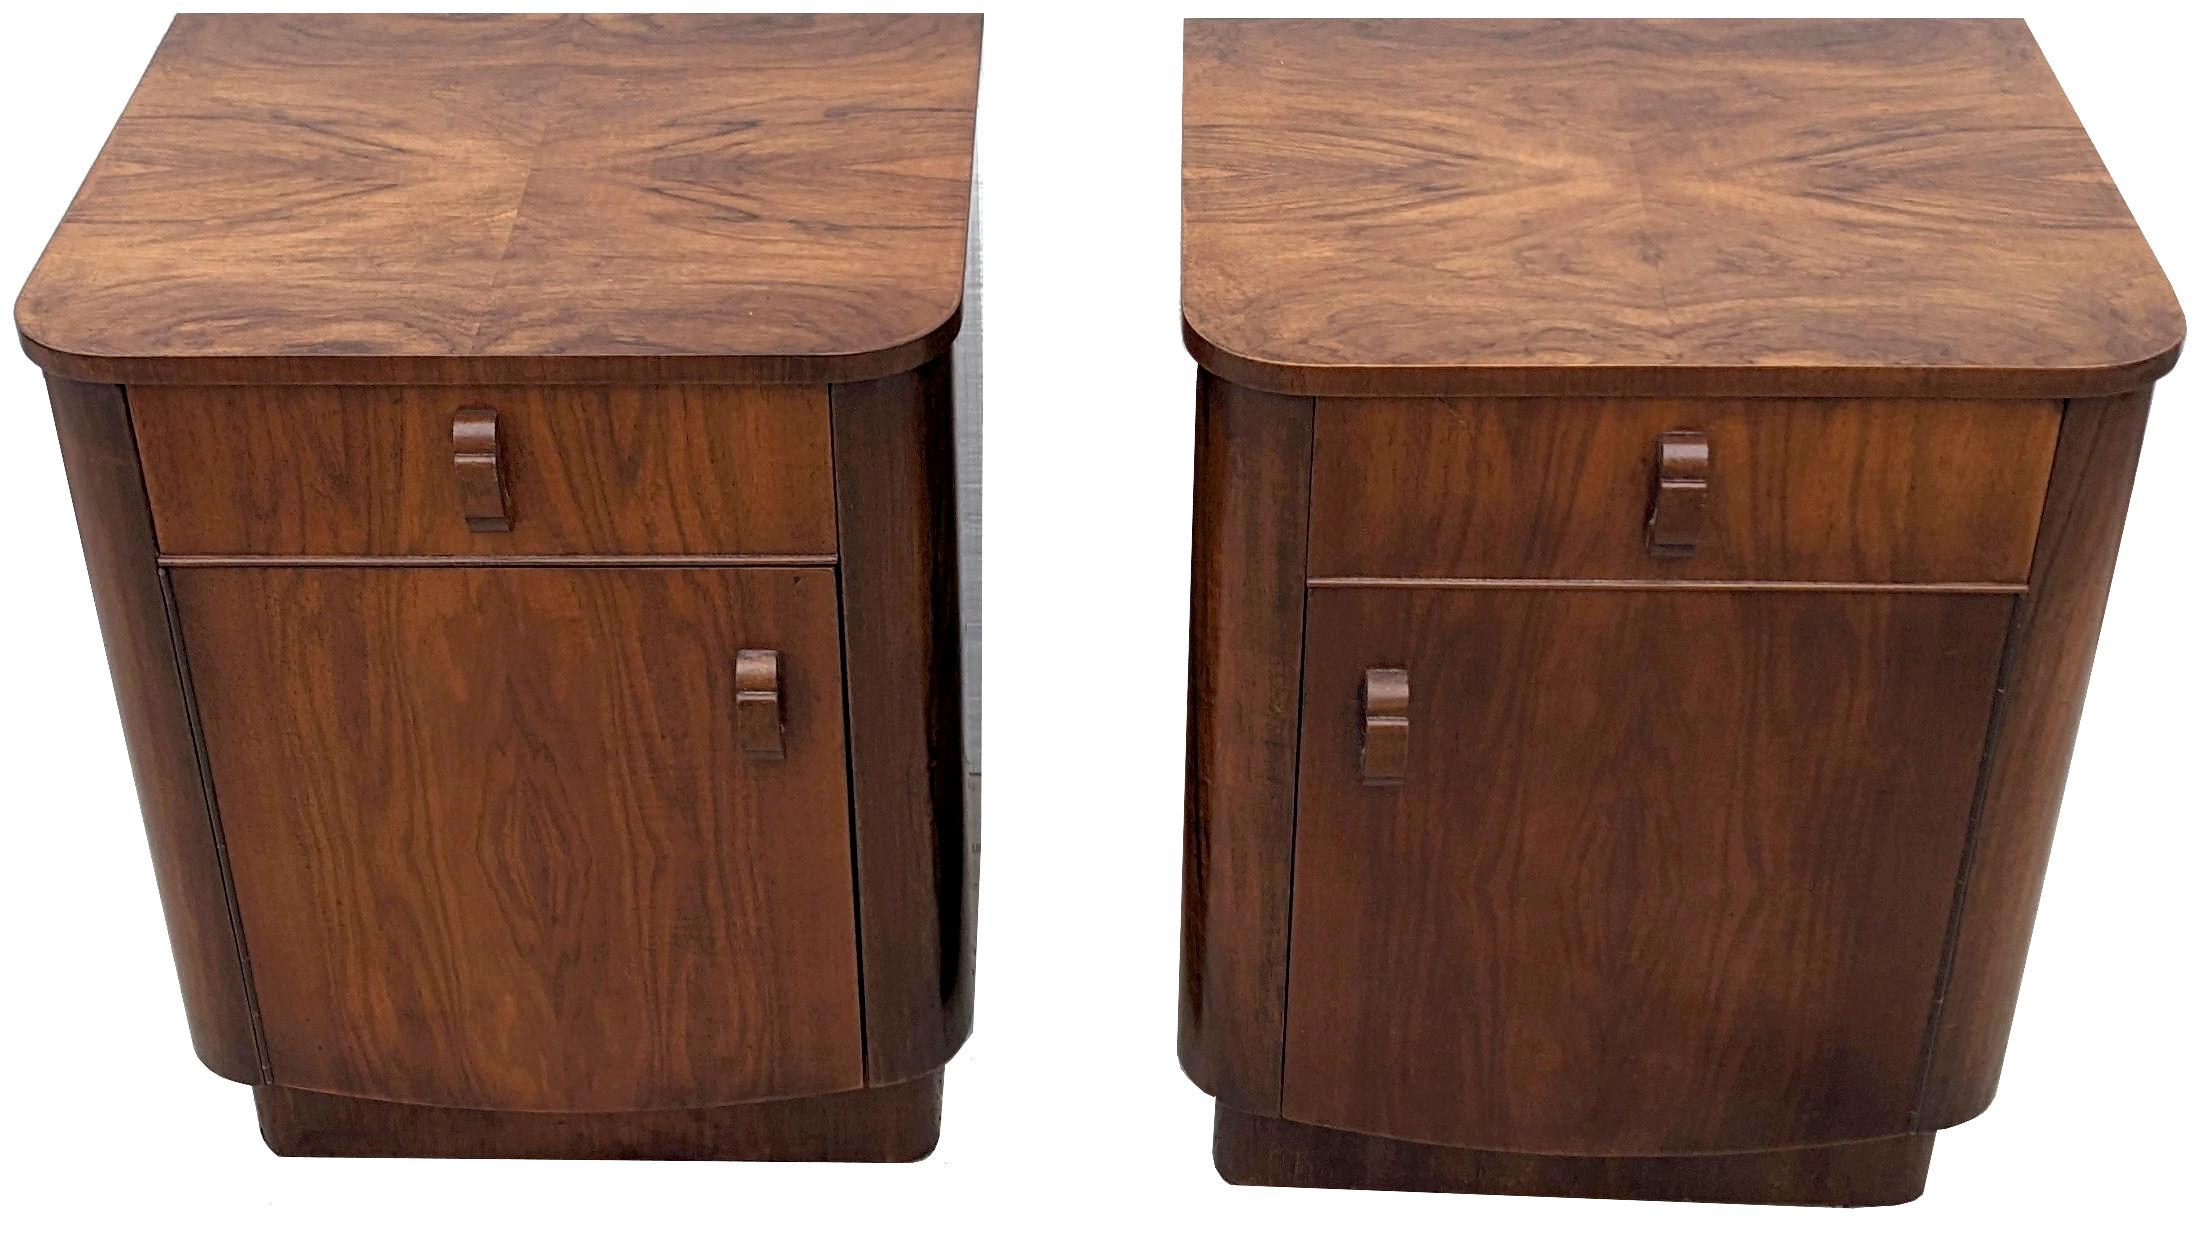 Pair of walnut original Art Deco bedside tables. Originating from England and dating to the early 1930's they fill both the highly desired shape of Art Deco at its best and sort after the luscious veneers of figured walnut veneers. A wonderful